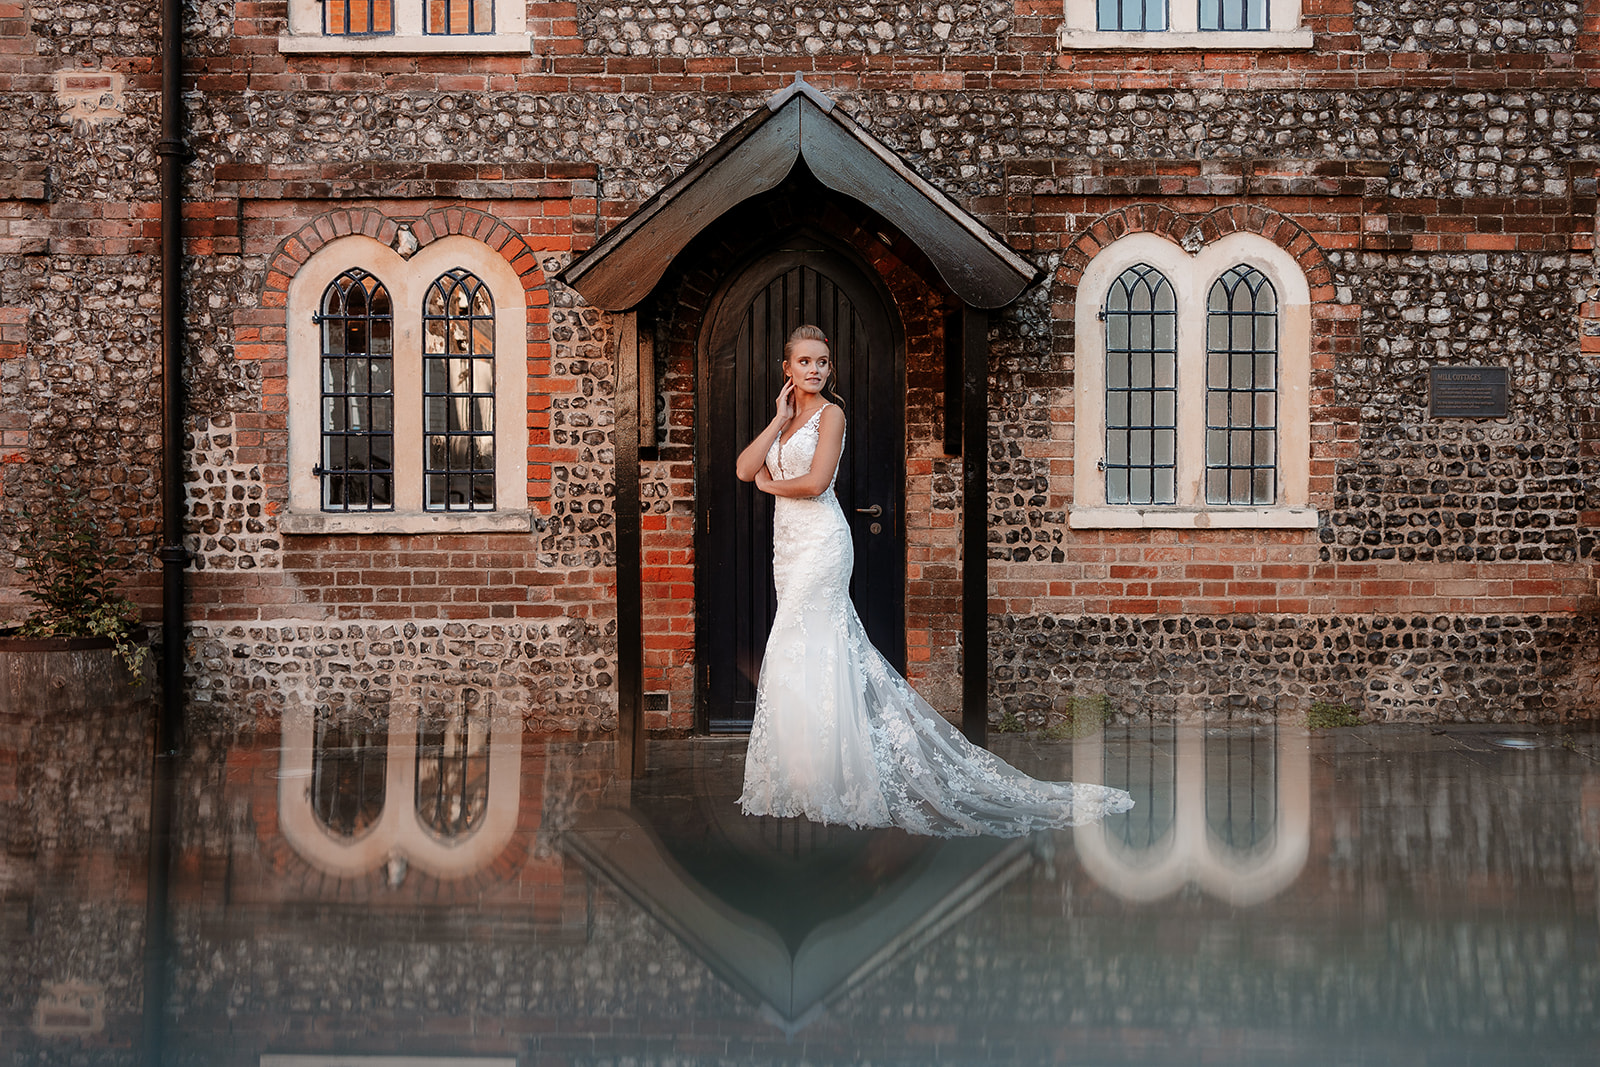 Bride in a white lace dress stands under an old porch, the arched windows and flint walls reflected below her. 